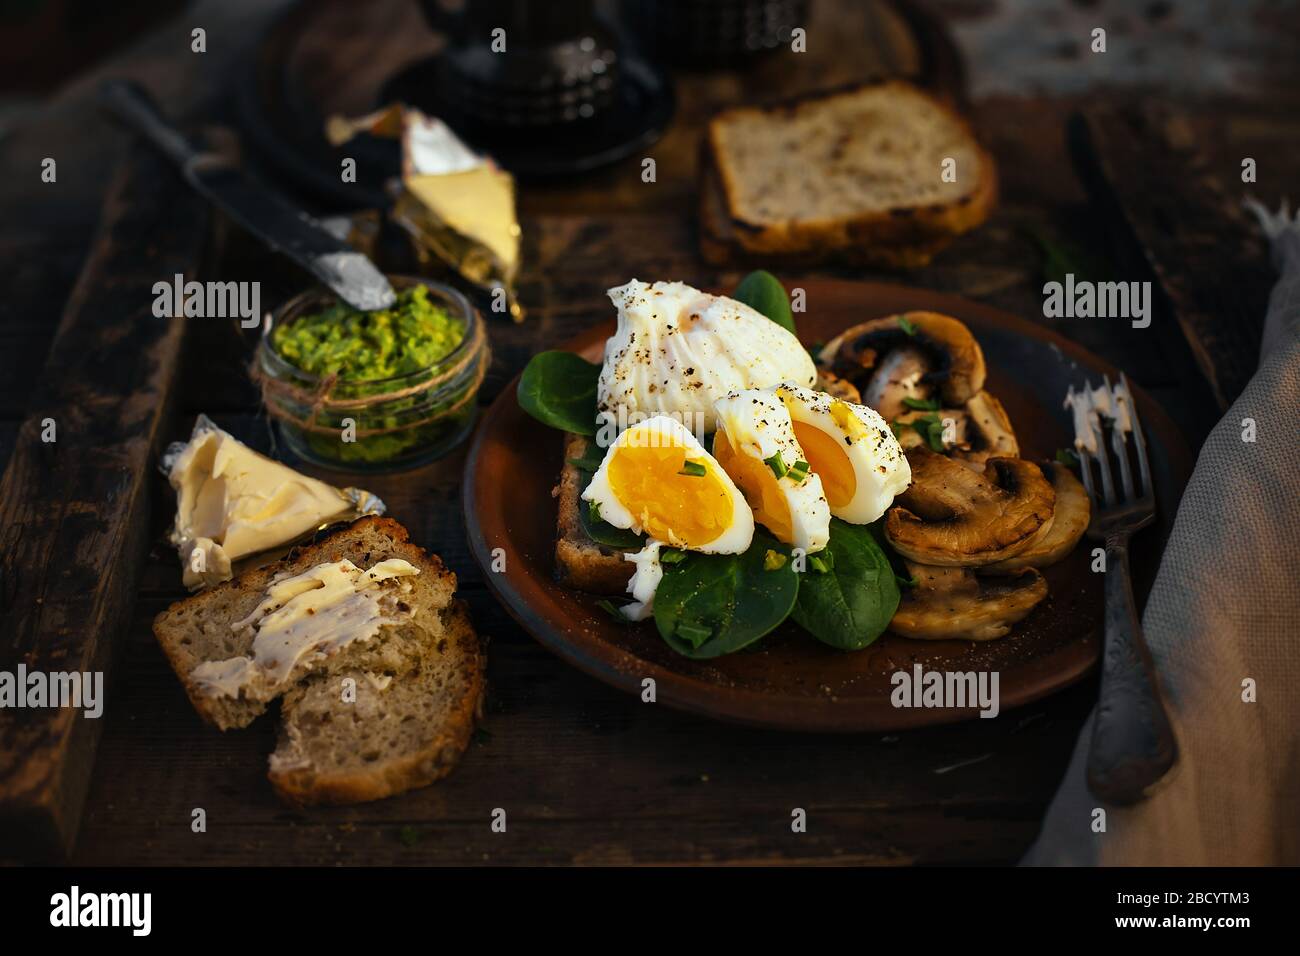 Appetizing breakfast boiled egg, toast, cheese and mushrooms in a clay plate on a wooden background. medium cooked egg. Stock Photo